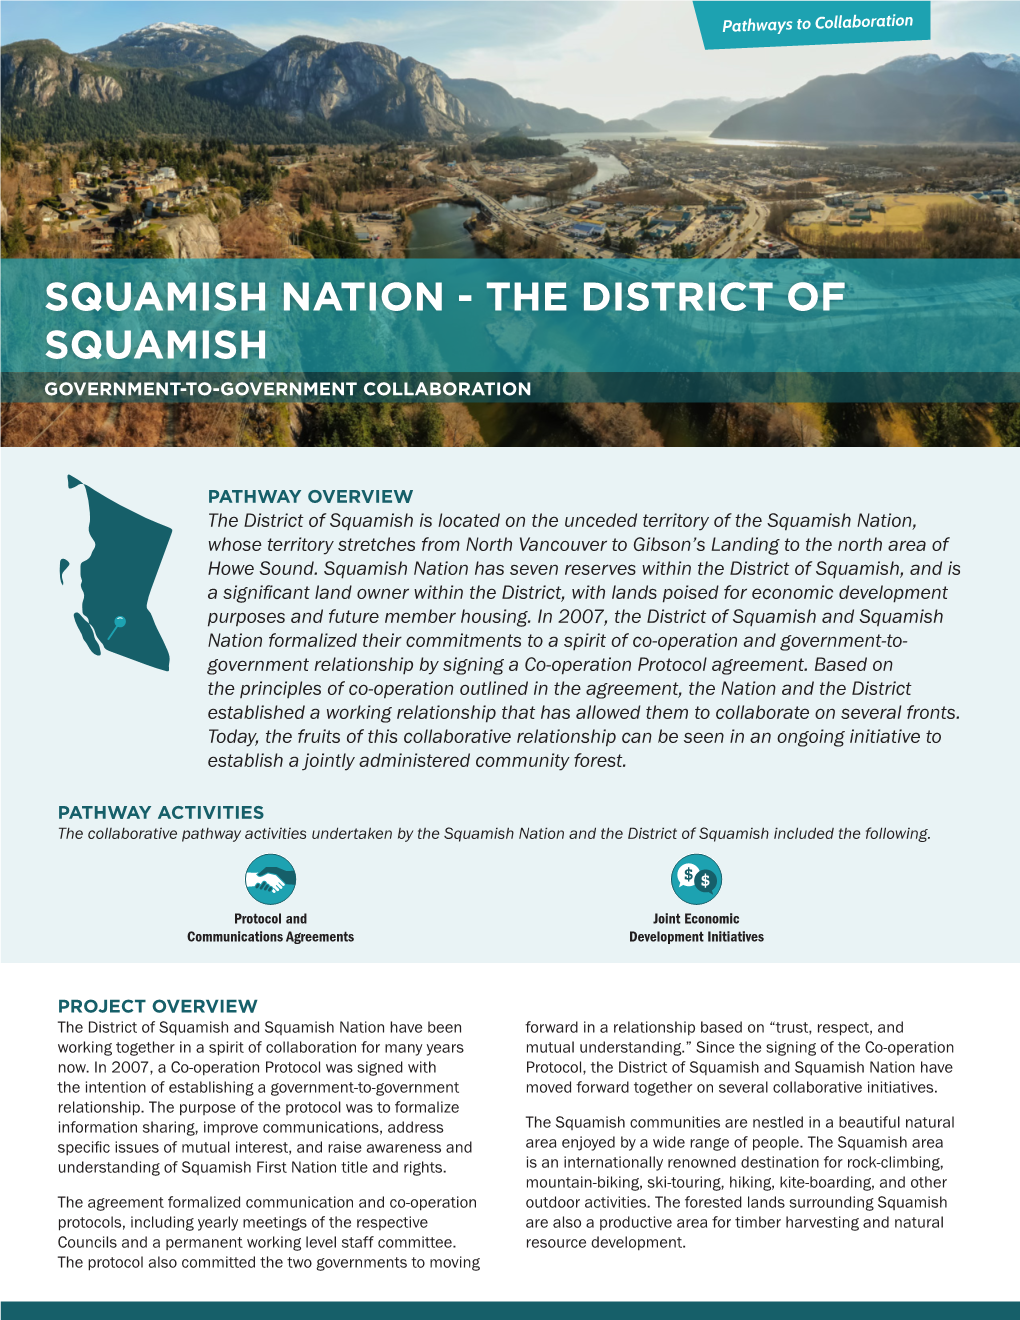 The District of Squamish Government-To-Government Collaboration